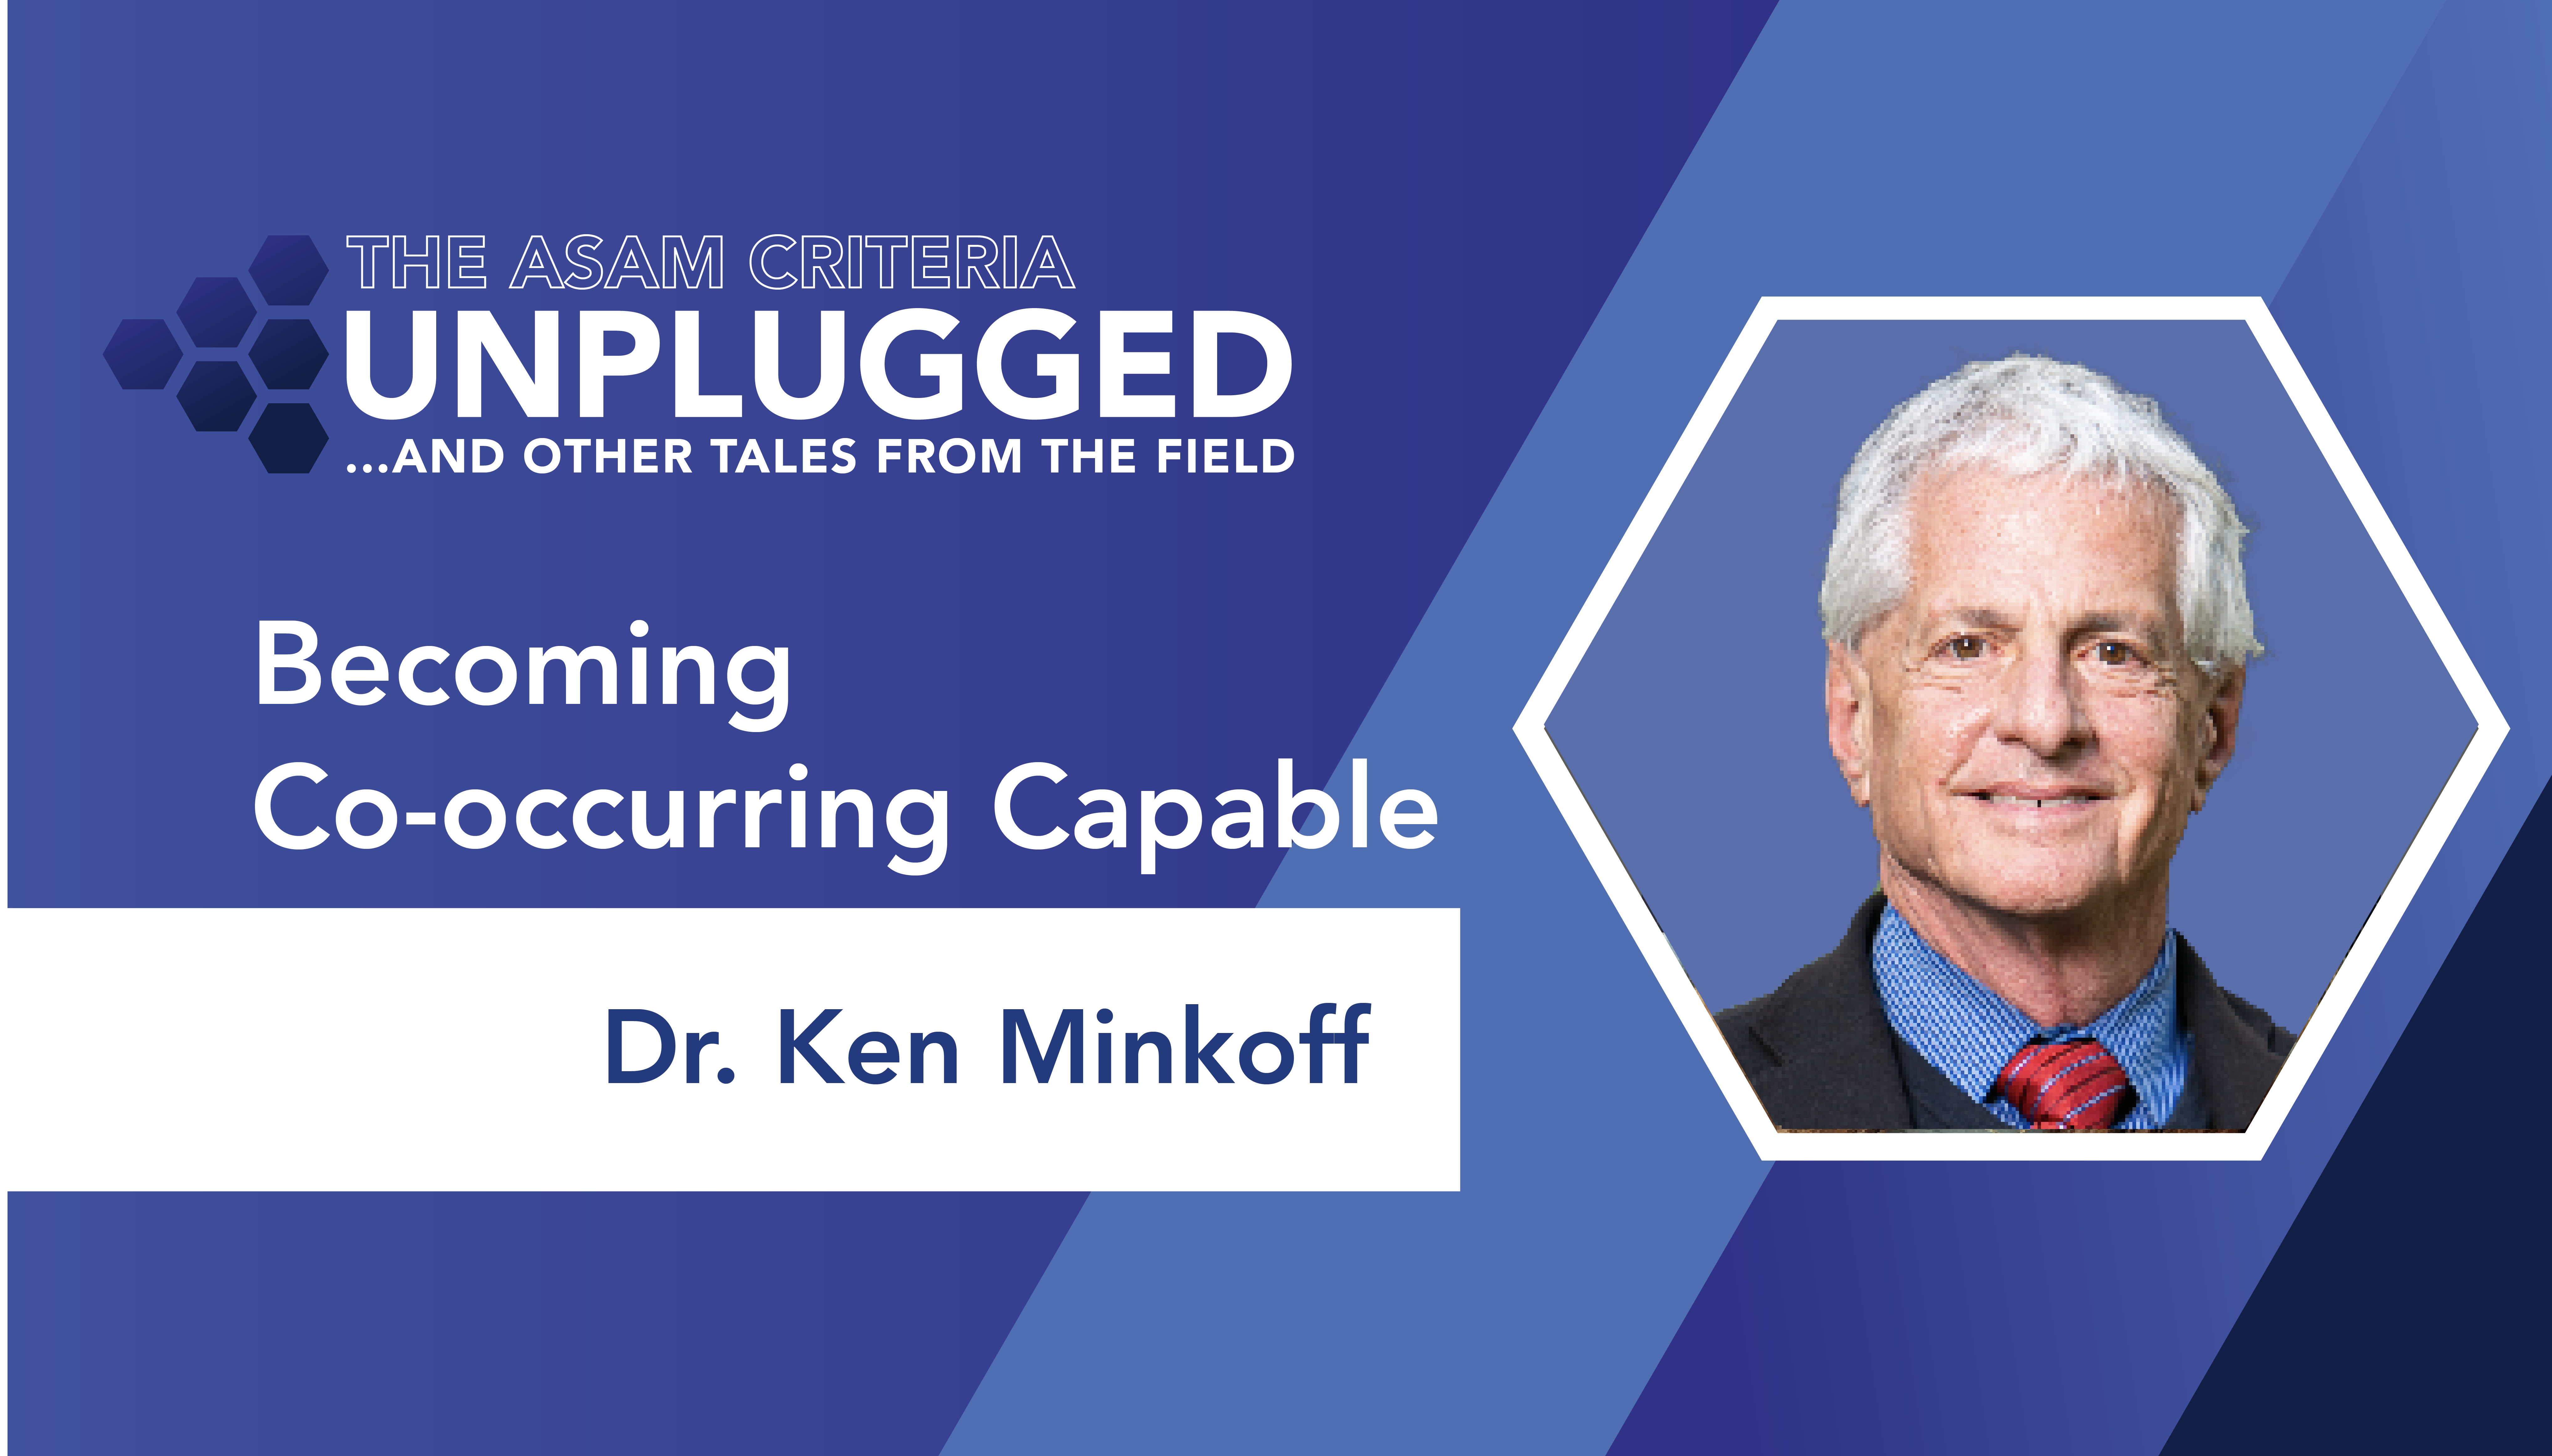 A blue background with a photo of Ken Minkoff in a hexagonal frame and the copy "The ASAM Criteria Unplugged and Other Tales from the Field: Becoming Co-occurring Capable — Dr. Ken Minkoff